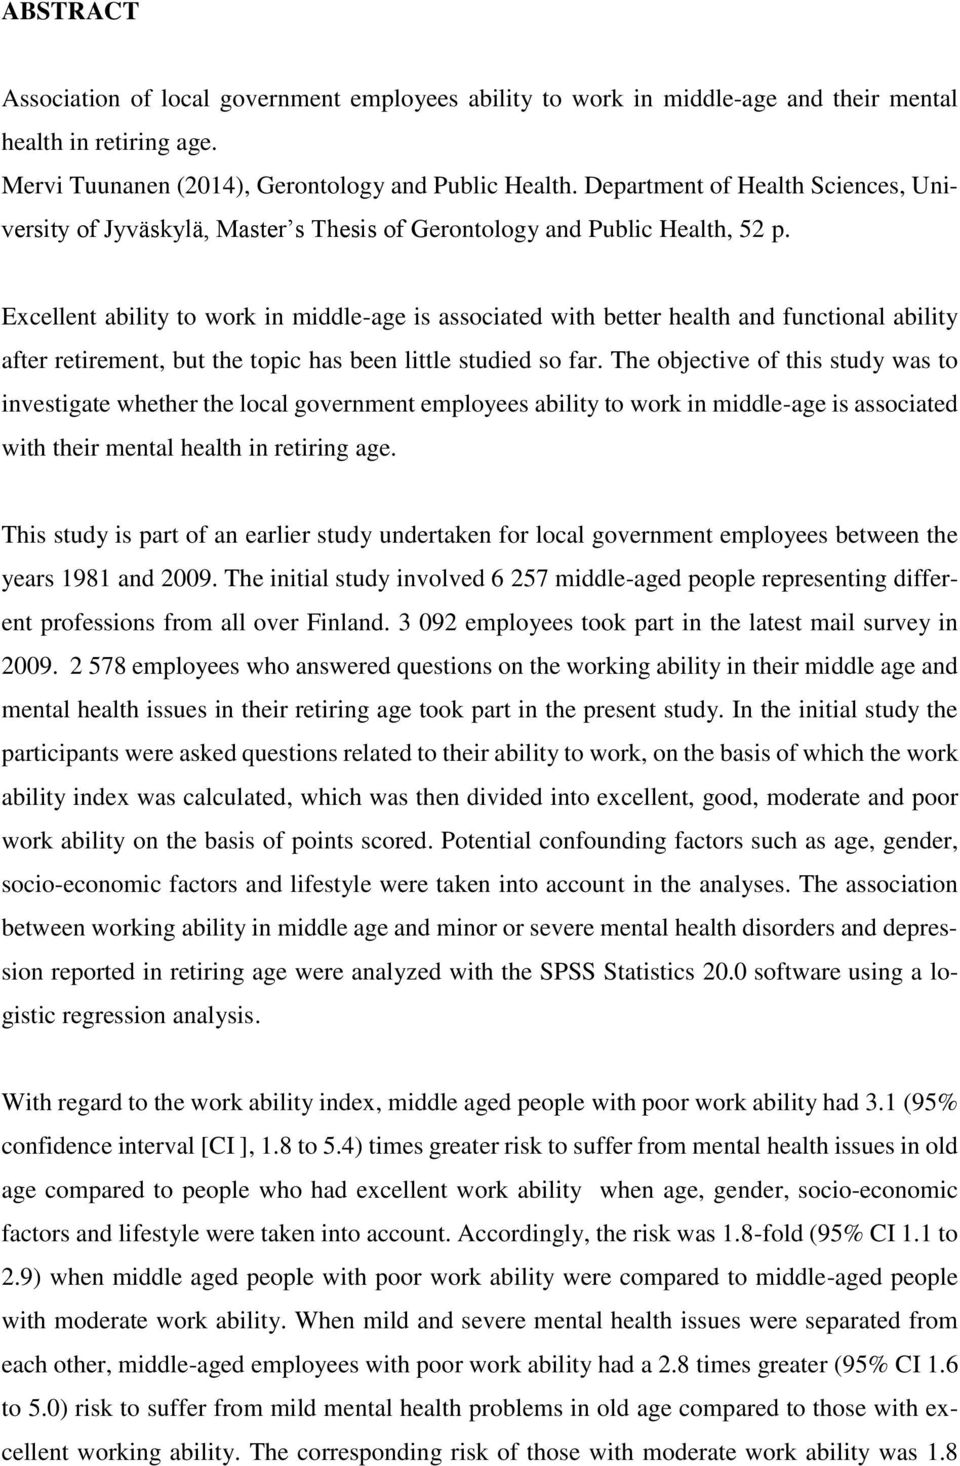 Excellent ability to work in middle-age is associated with better health and functional ability after retirement, but the topic has been little studied so far.